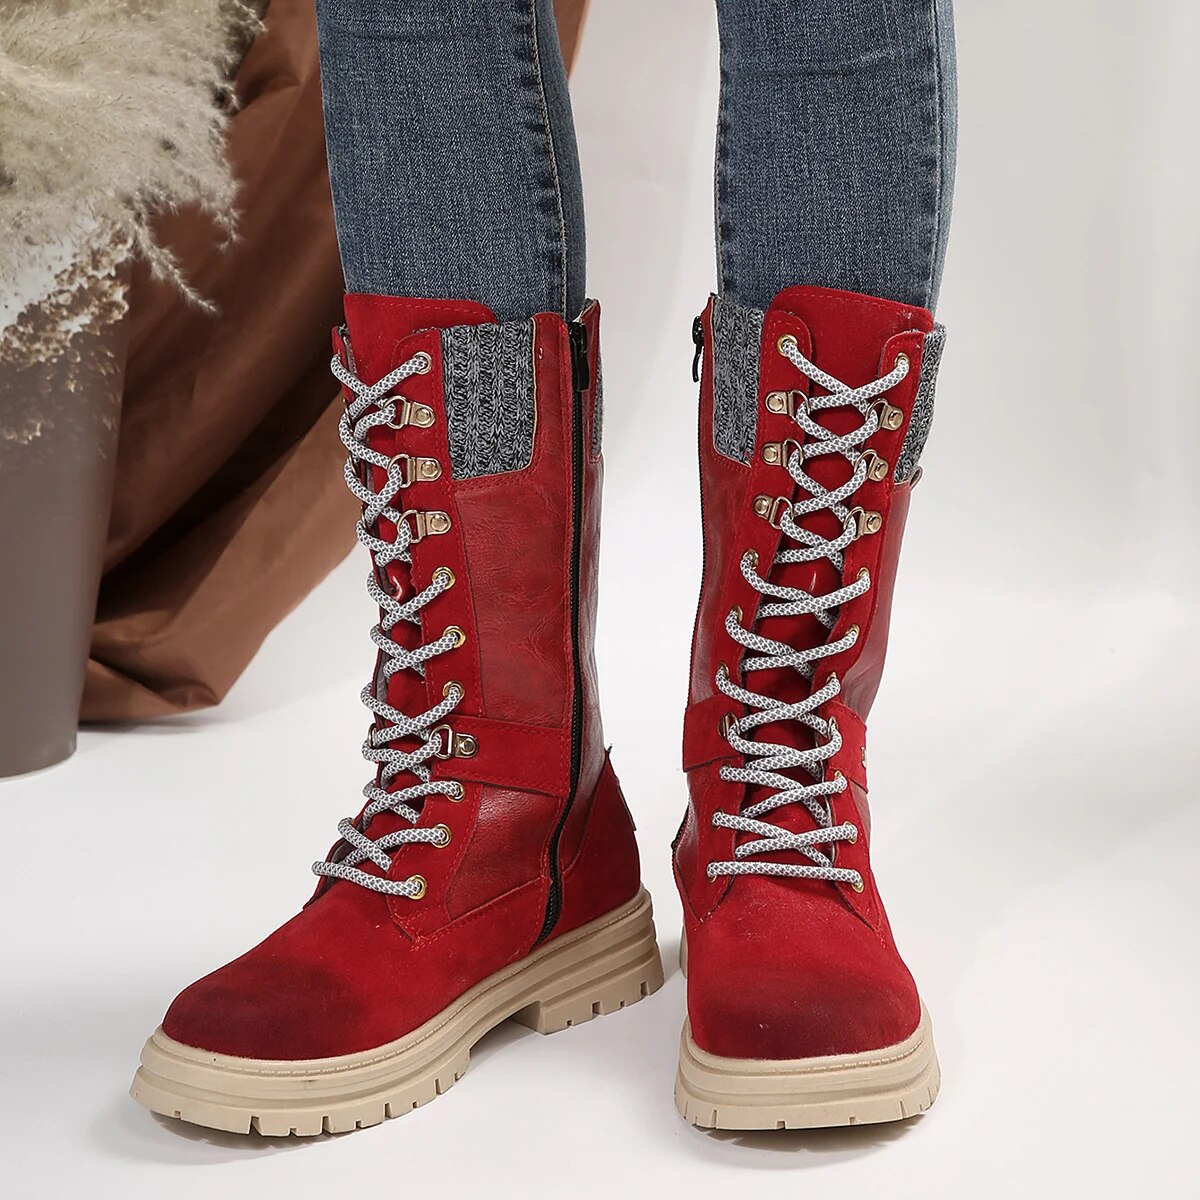 Gominglo -Women's Mid-Calf Autumn Winter Platform Patchwork Long Boots GOMINGLO